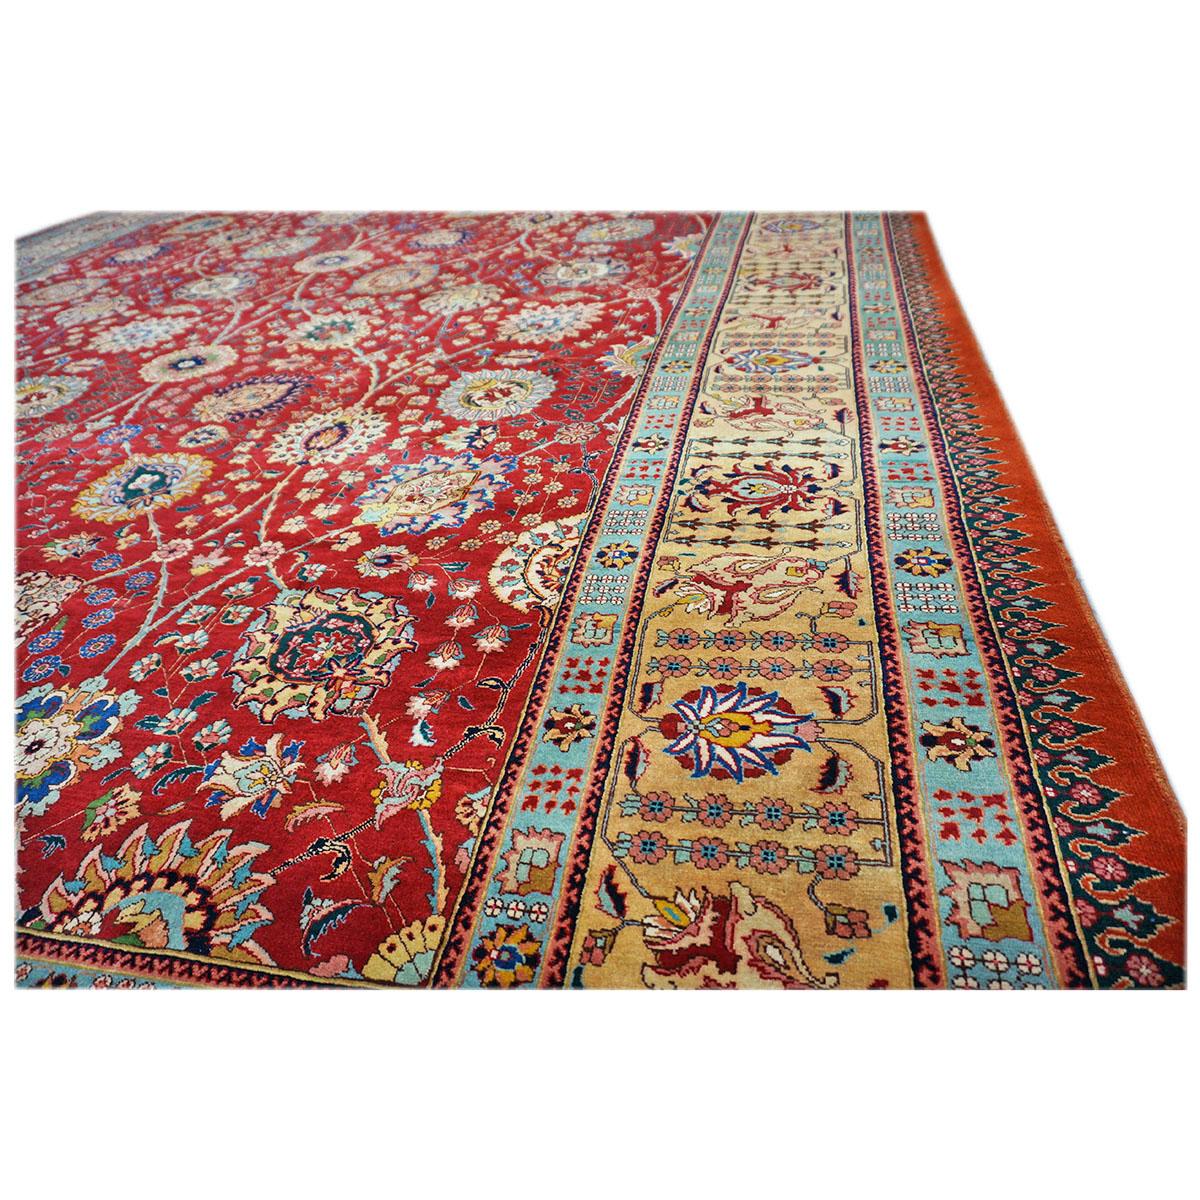 Mid-20th Century 20th Century Antique Persian Tabriz Pahlavi 10x13 Red & Gold Handmade Area Rug For Sale